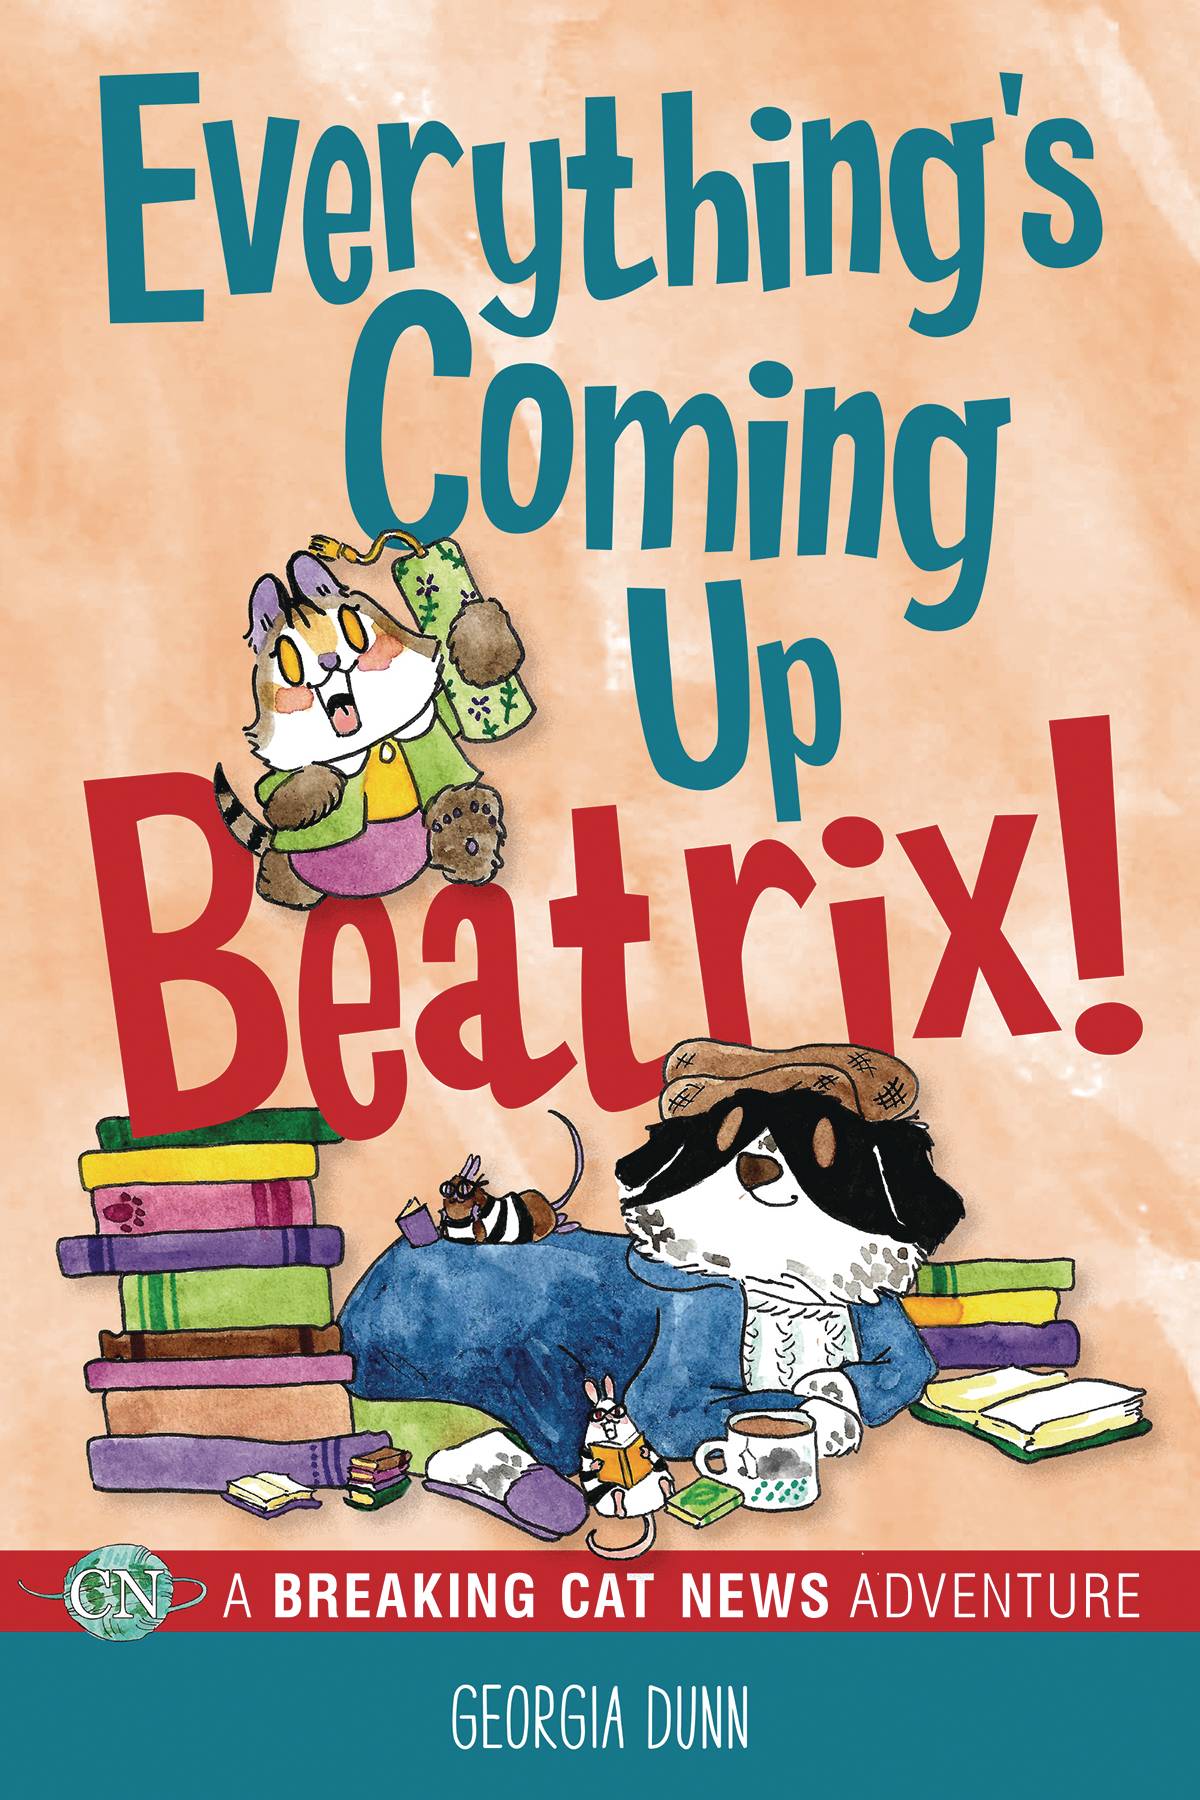 Breaking Cat News Everythings Coming Up Beatrix TP